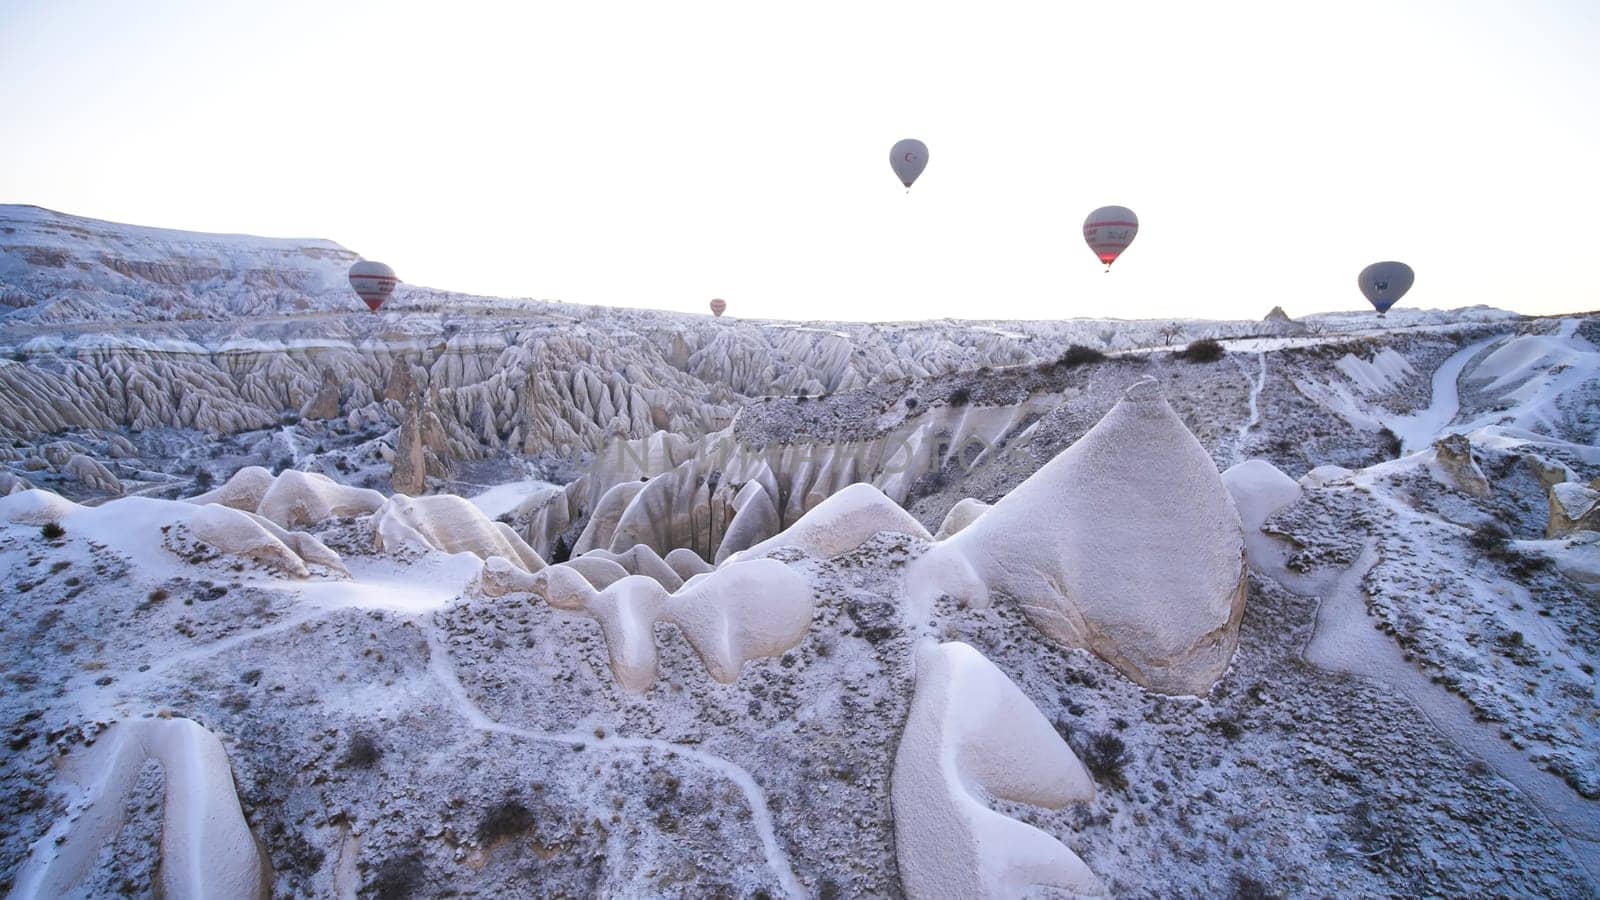 Multi-colored balls in Cappadocia on the background of volcanic rocks. by DovidPro